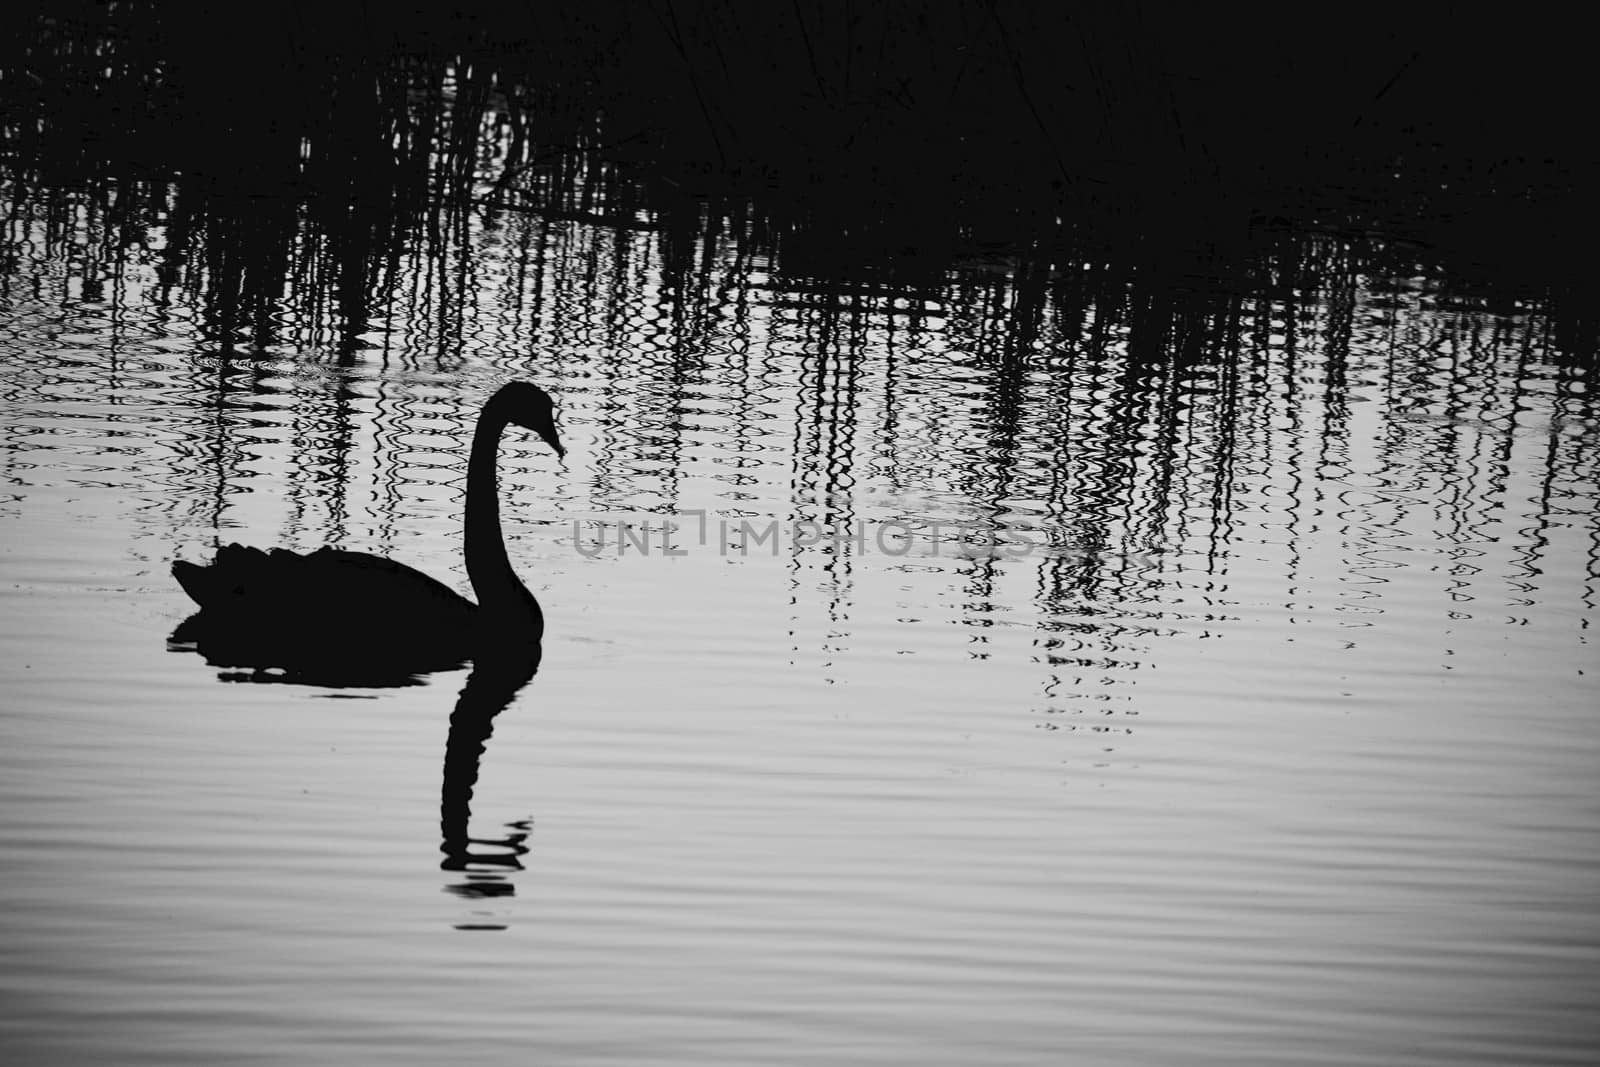 A close-up photo of a bird; a black swan (Cygnus atratus) in natural environment; glimmering water background; late evening